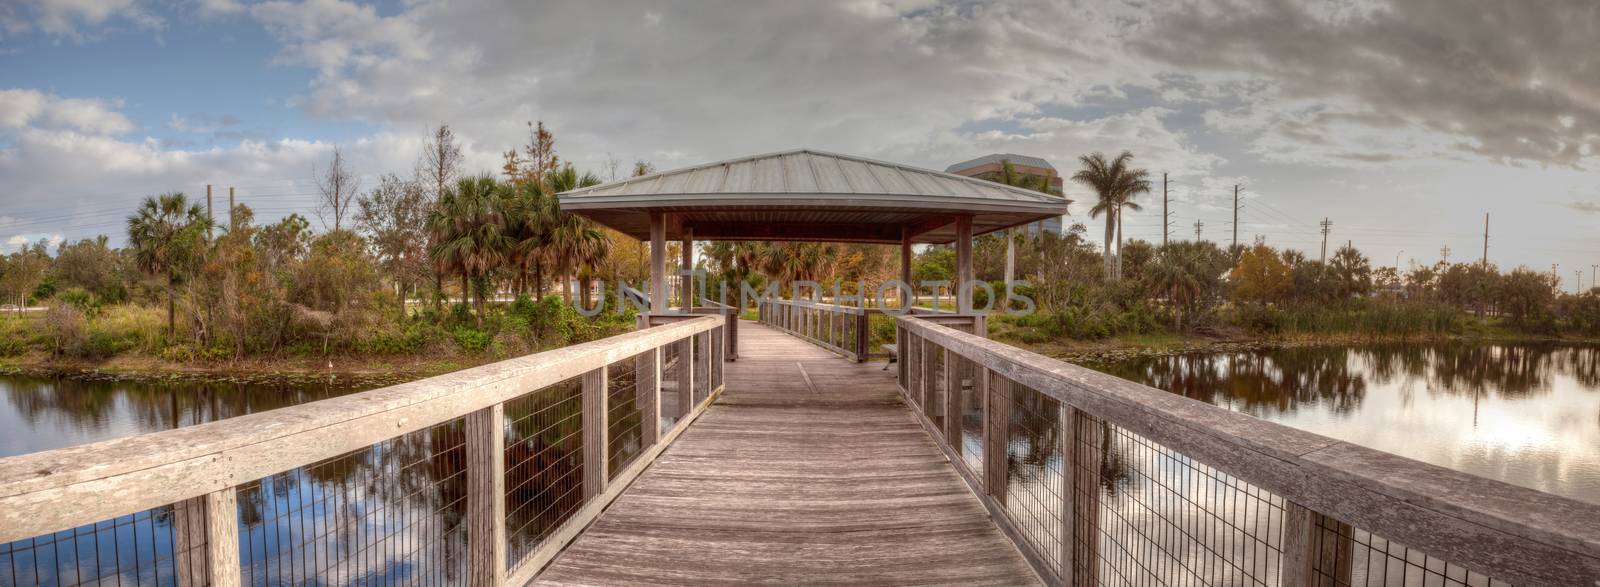 Sunset over Gazebo on a wooden secluded, tranquil boardwalk along a marsh pond in Freedom Park in Naples, Florida